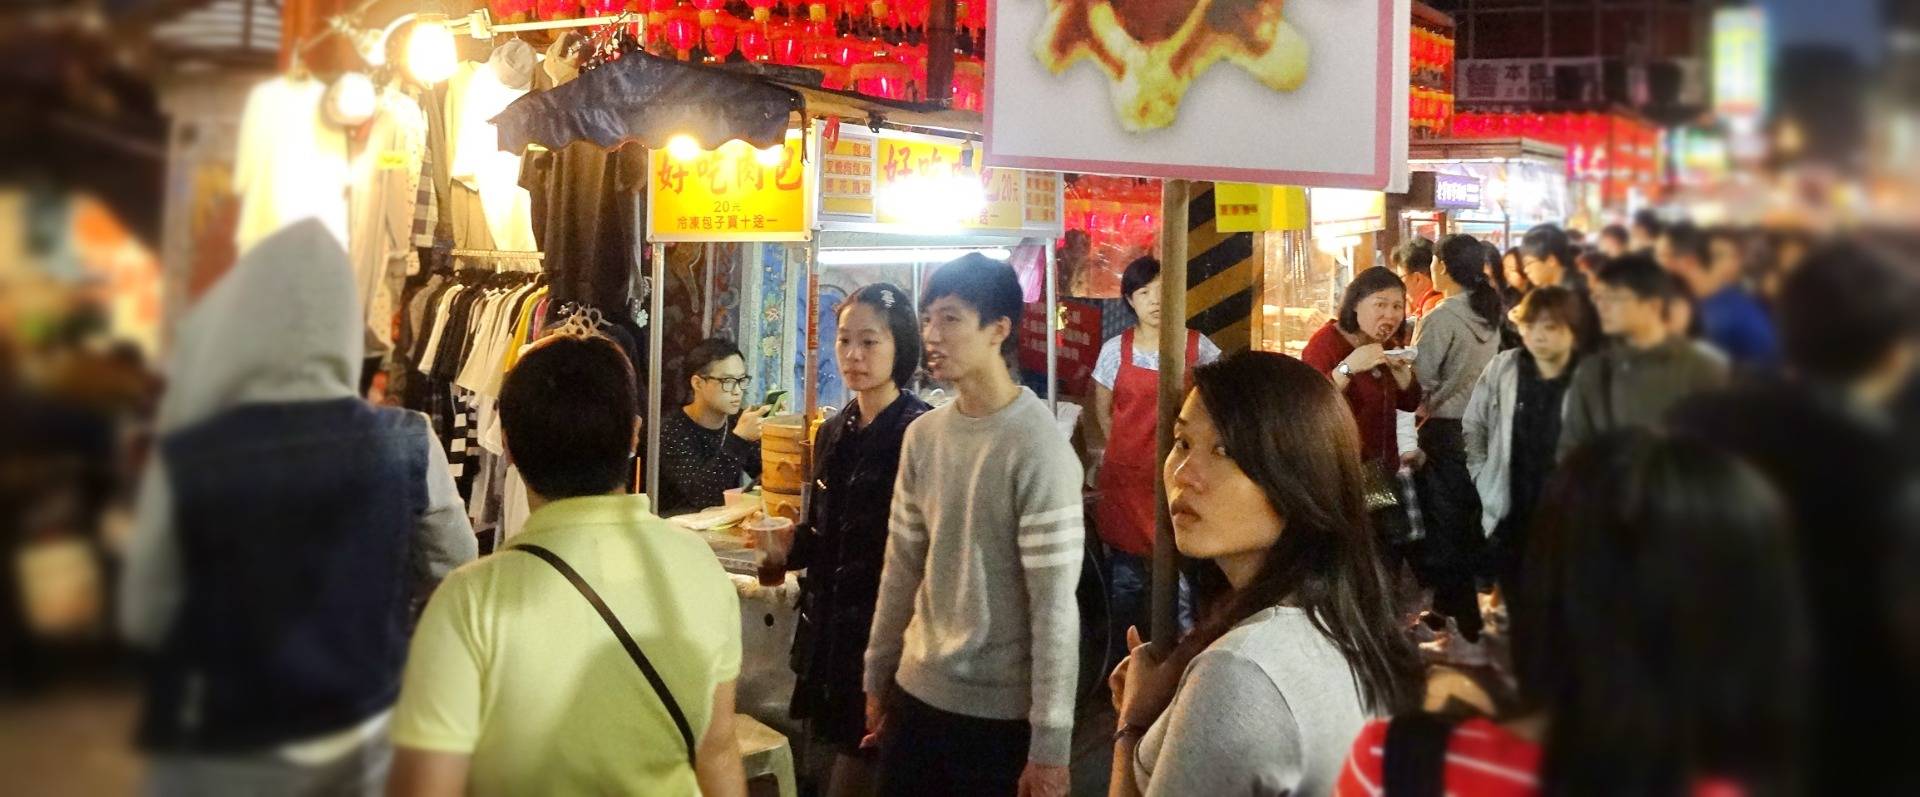 Taiwans night markets: How does a snake taste